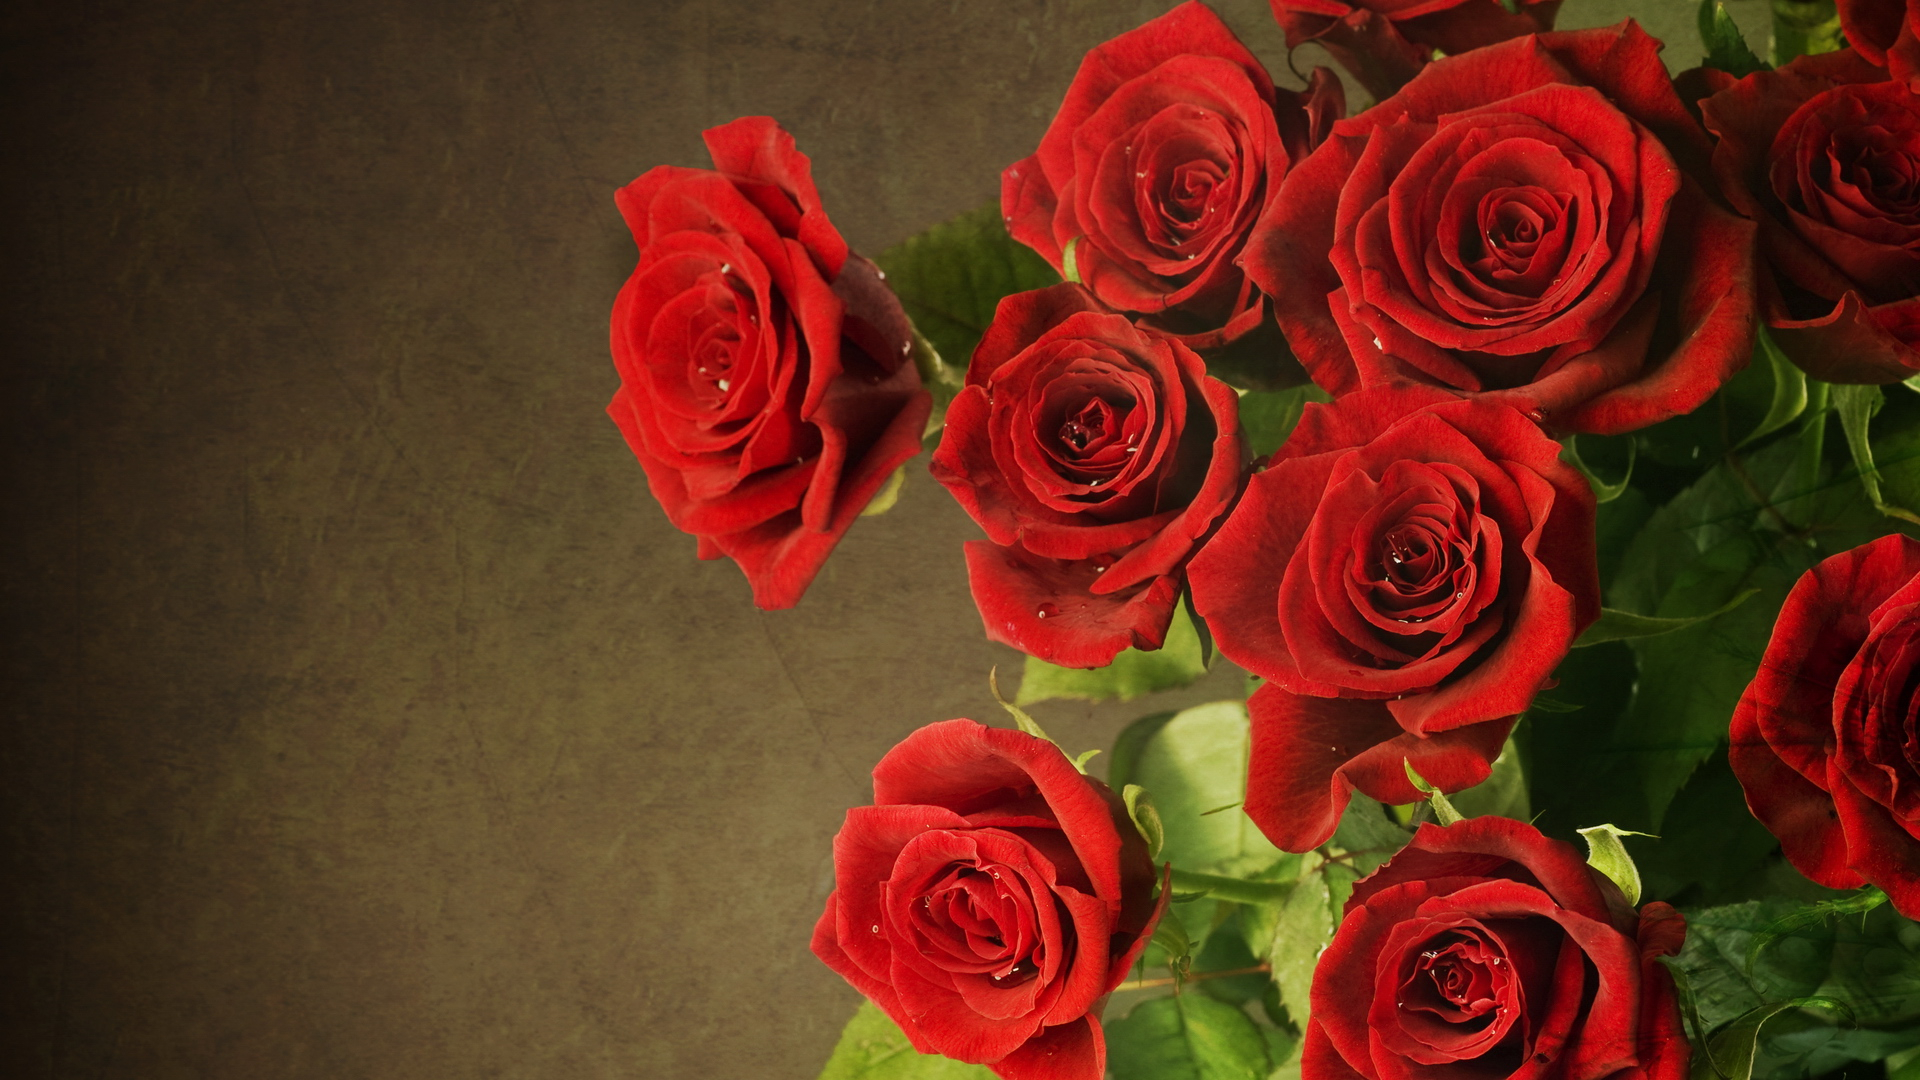  roses wallpaper and theme for Windows 10 All for Windows 10 Free